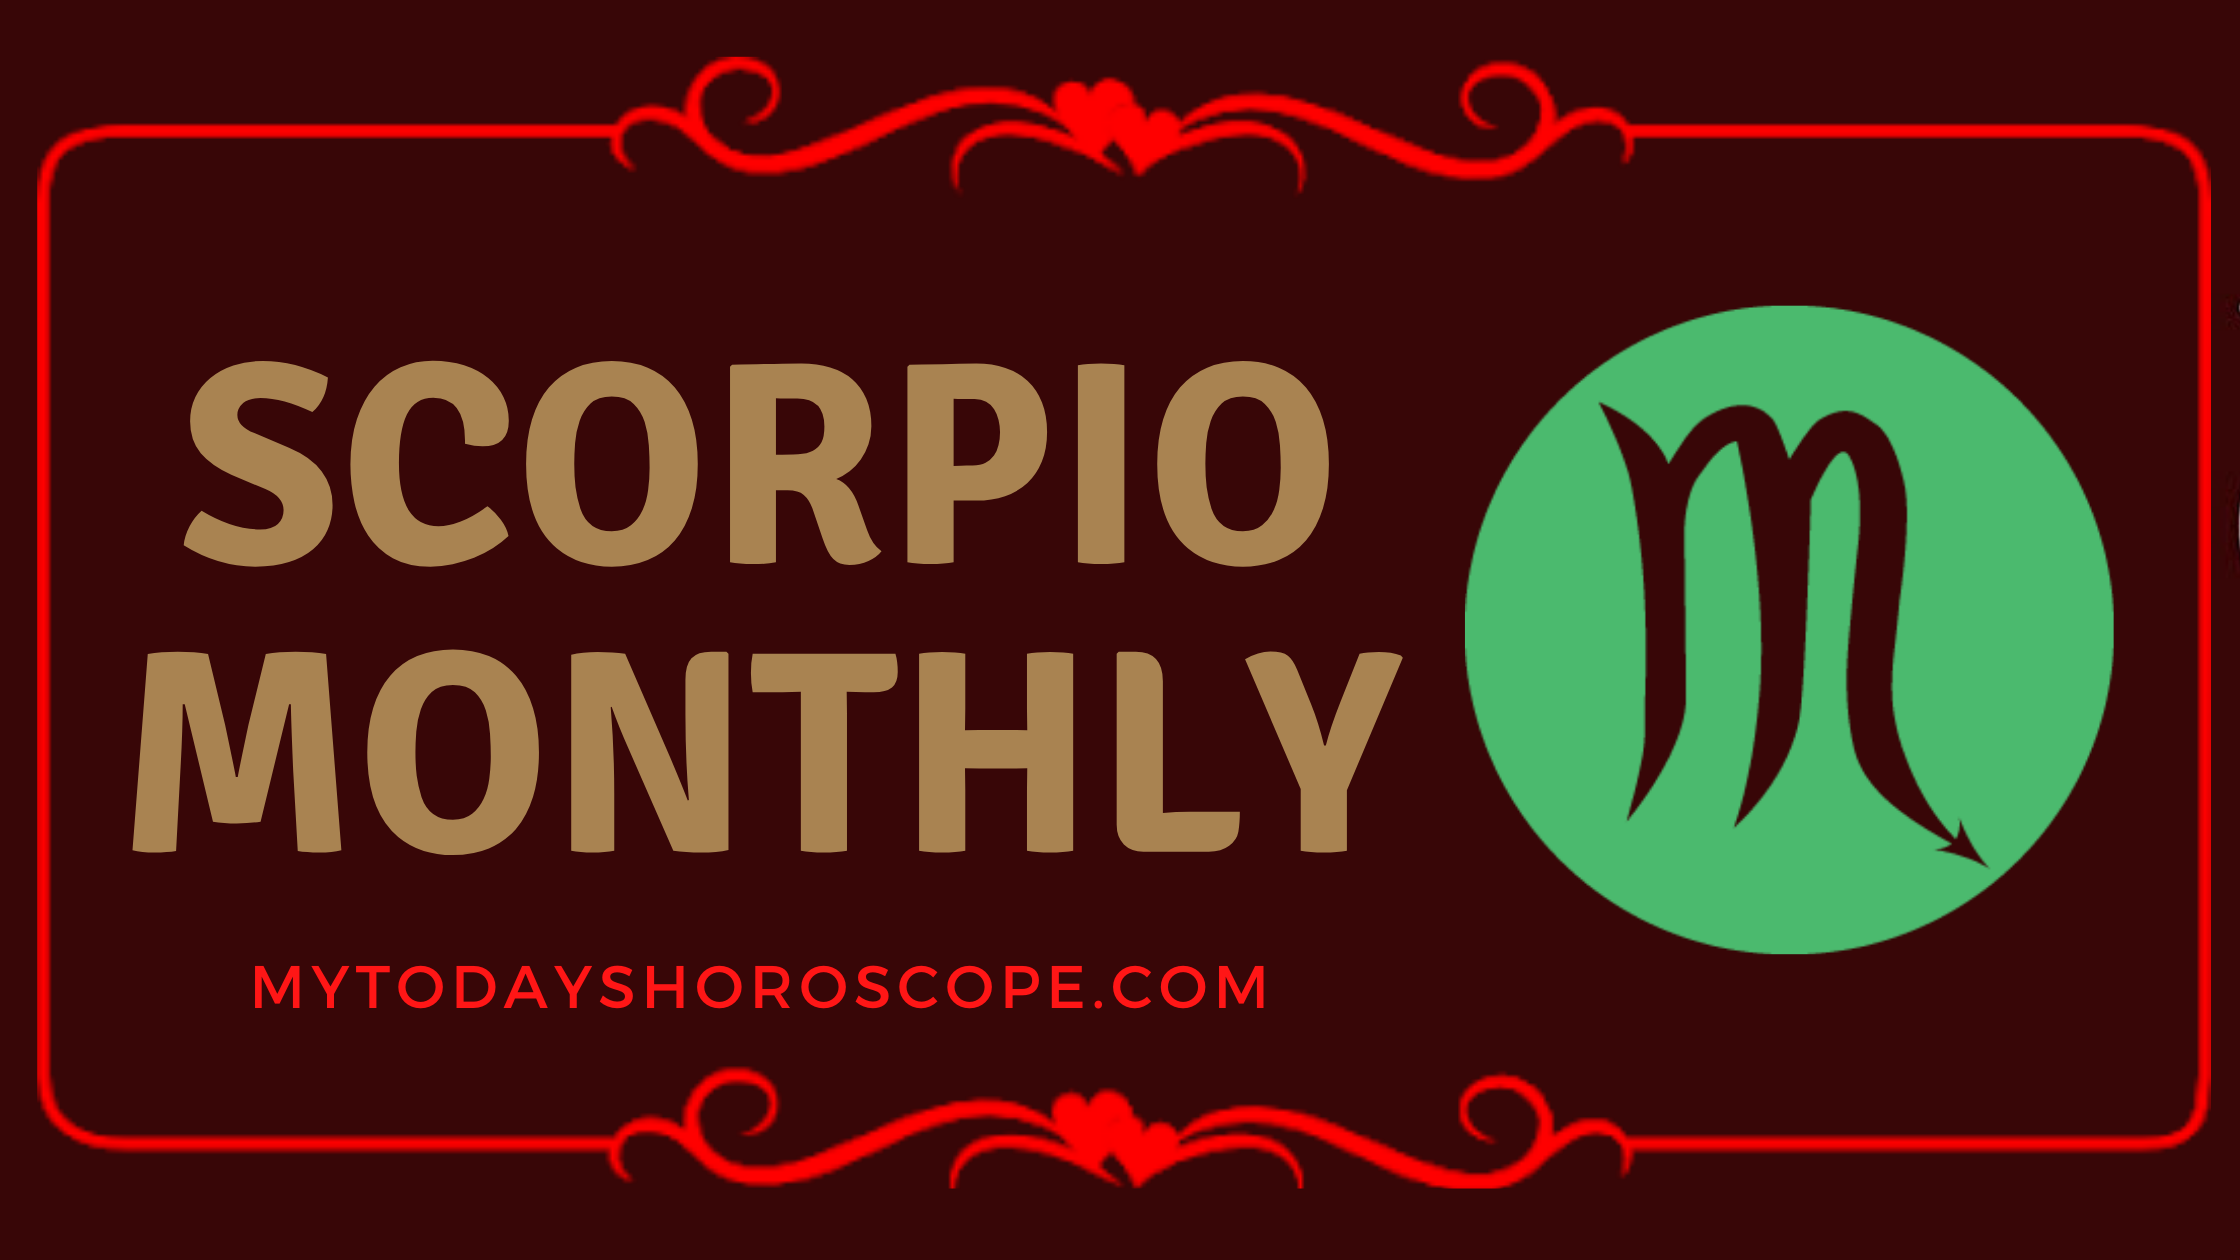 Scorpio Monthly Love, Work and Well Being Horoscope